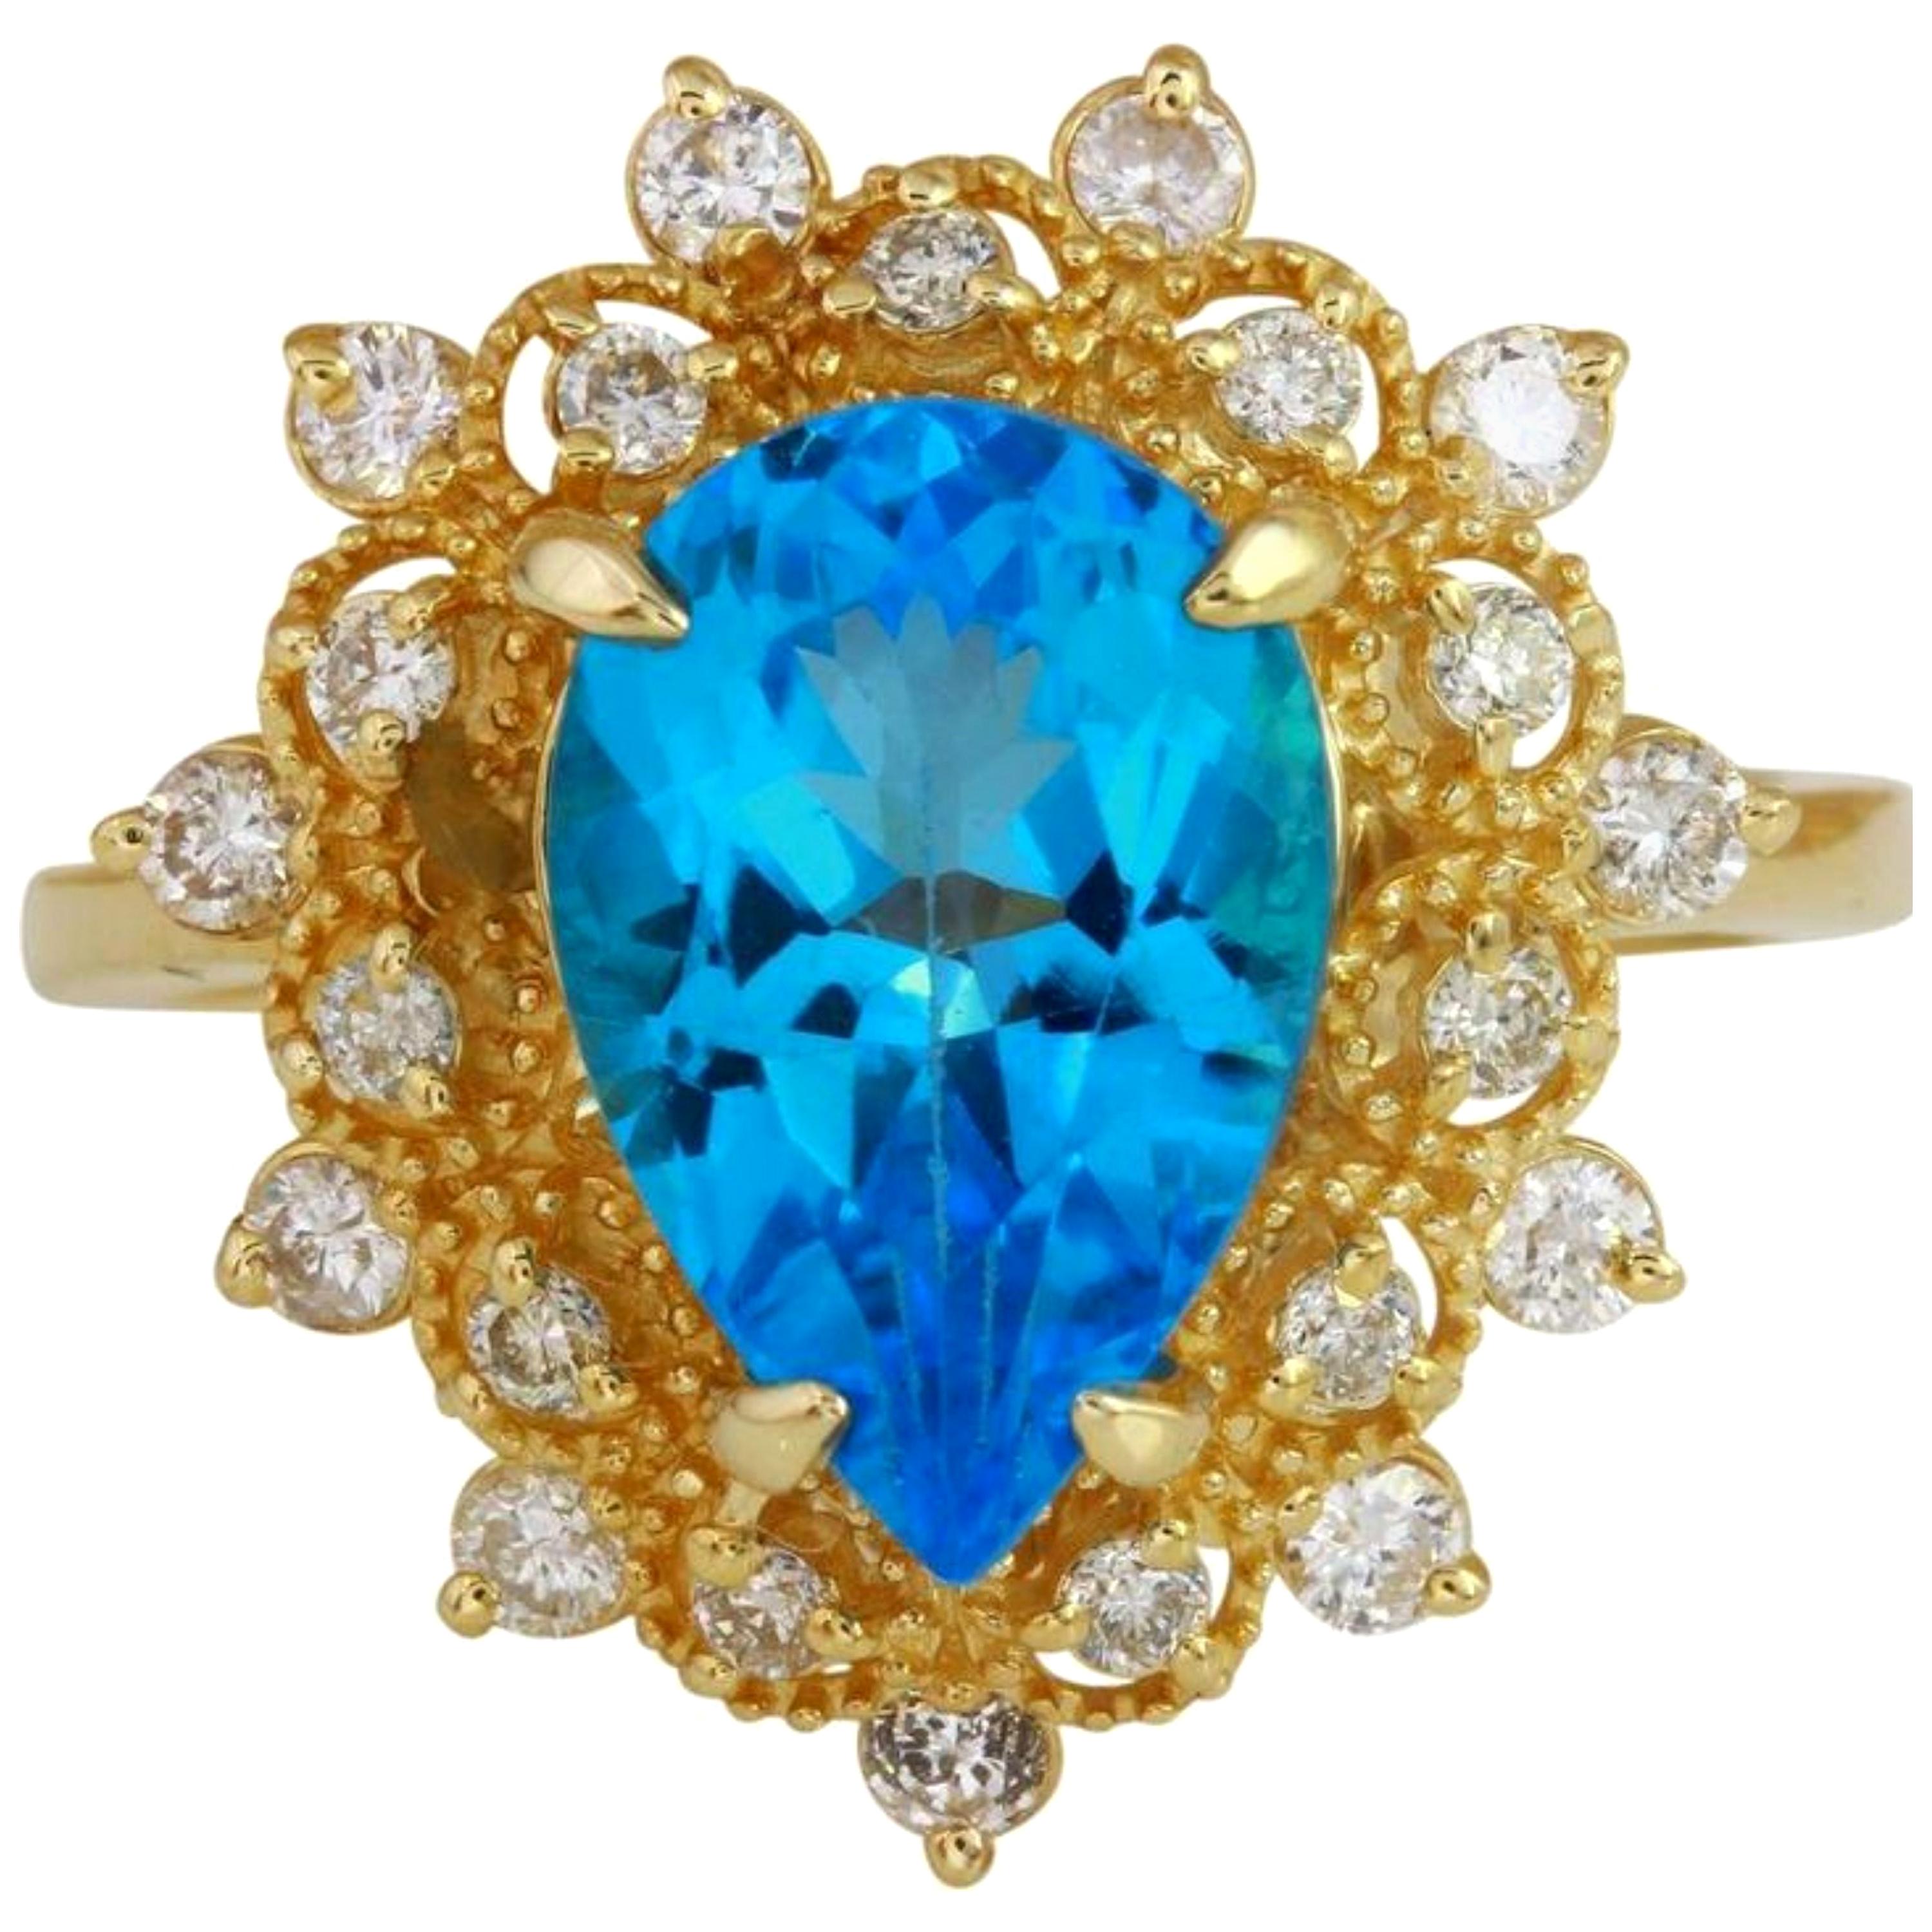 5.22 Ct Natural Gorgeous Swiss Blue Topaz and Diamond 14K Solid Yellow Gold Ring